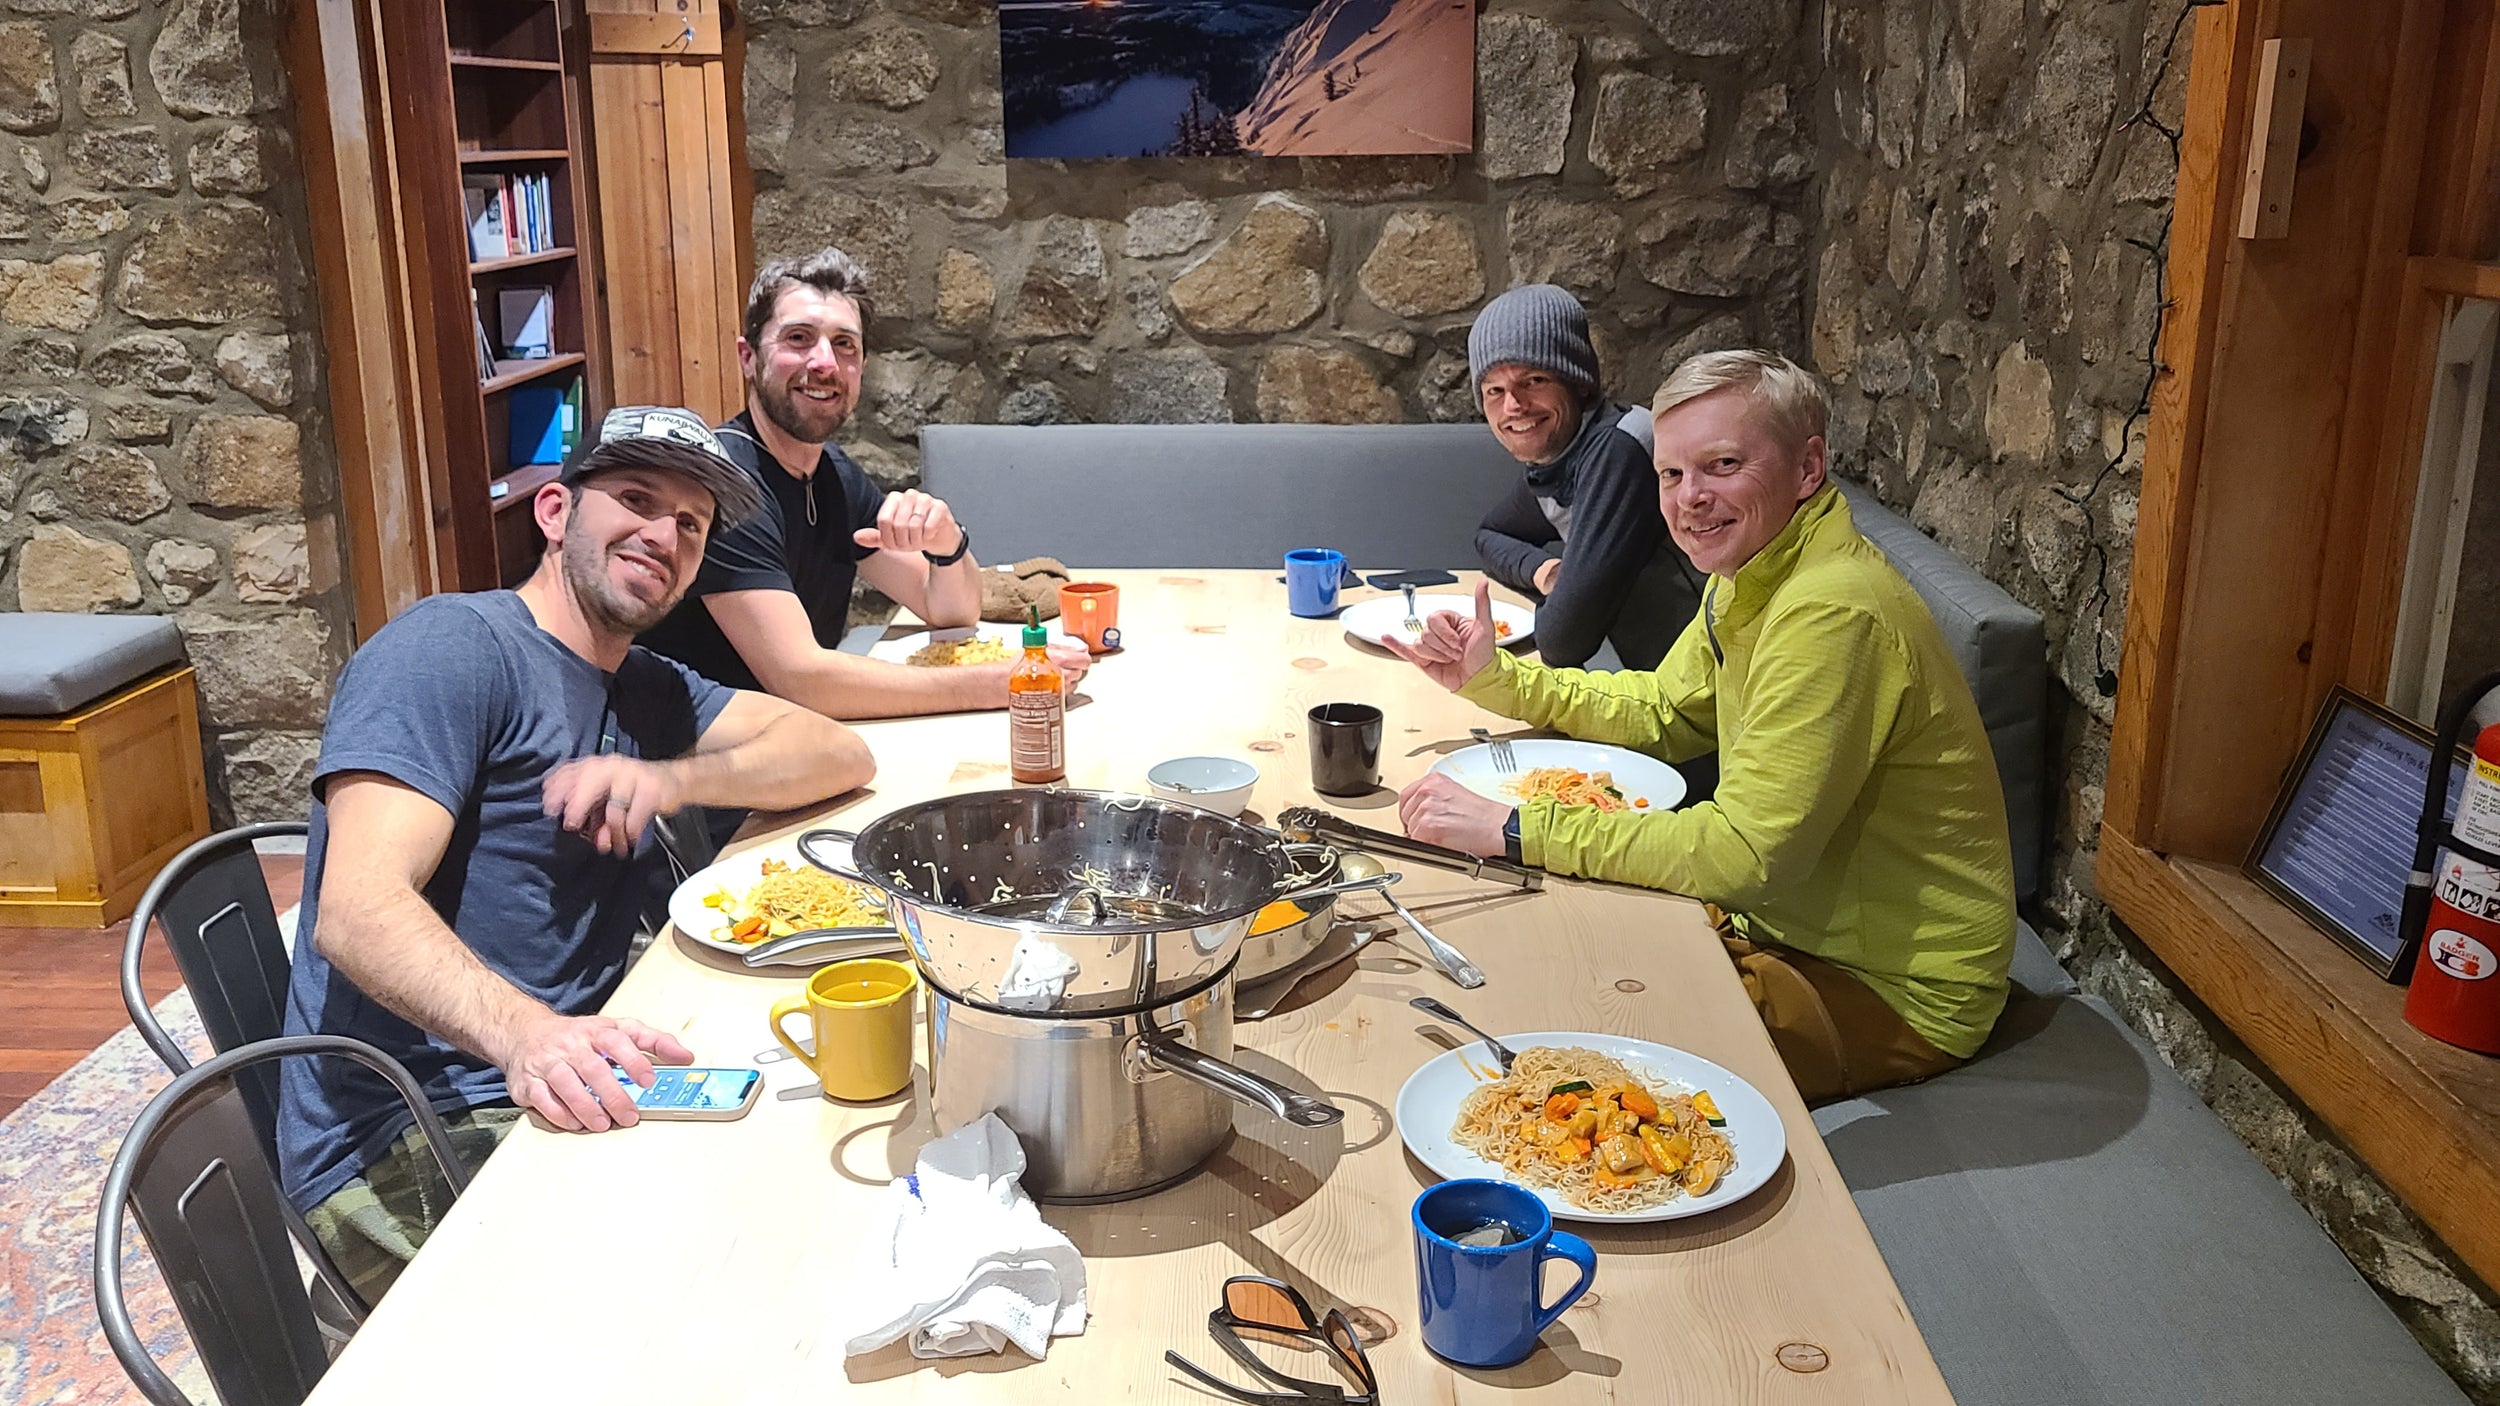 A private group having dinner at the Frog Lake Backcountry Ski Huts in Truckee